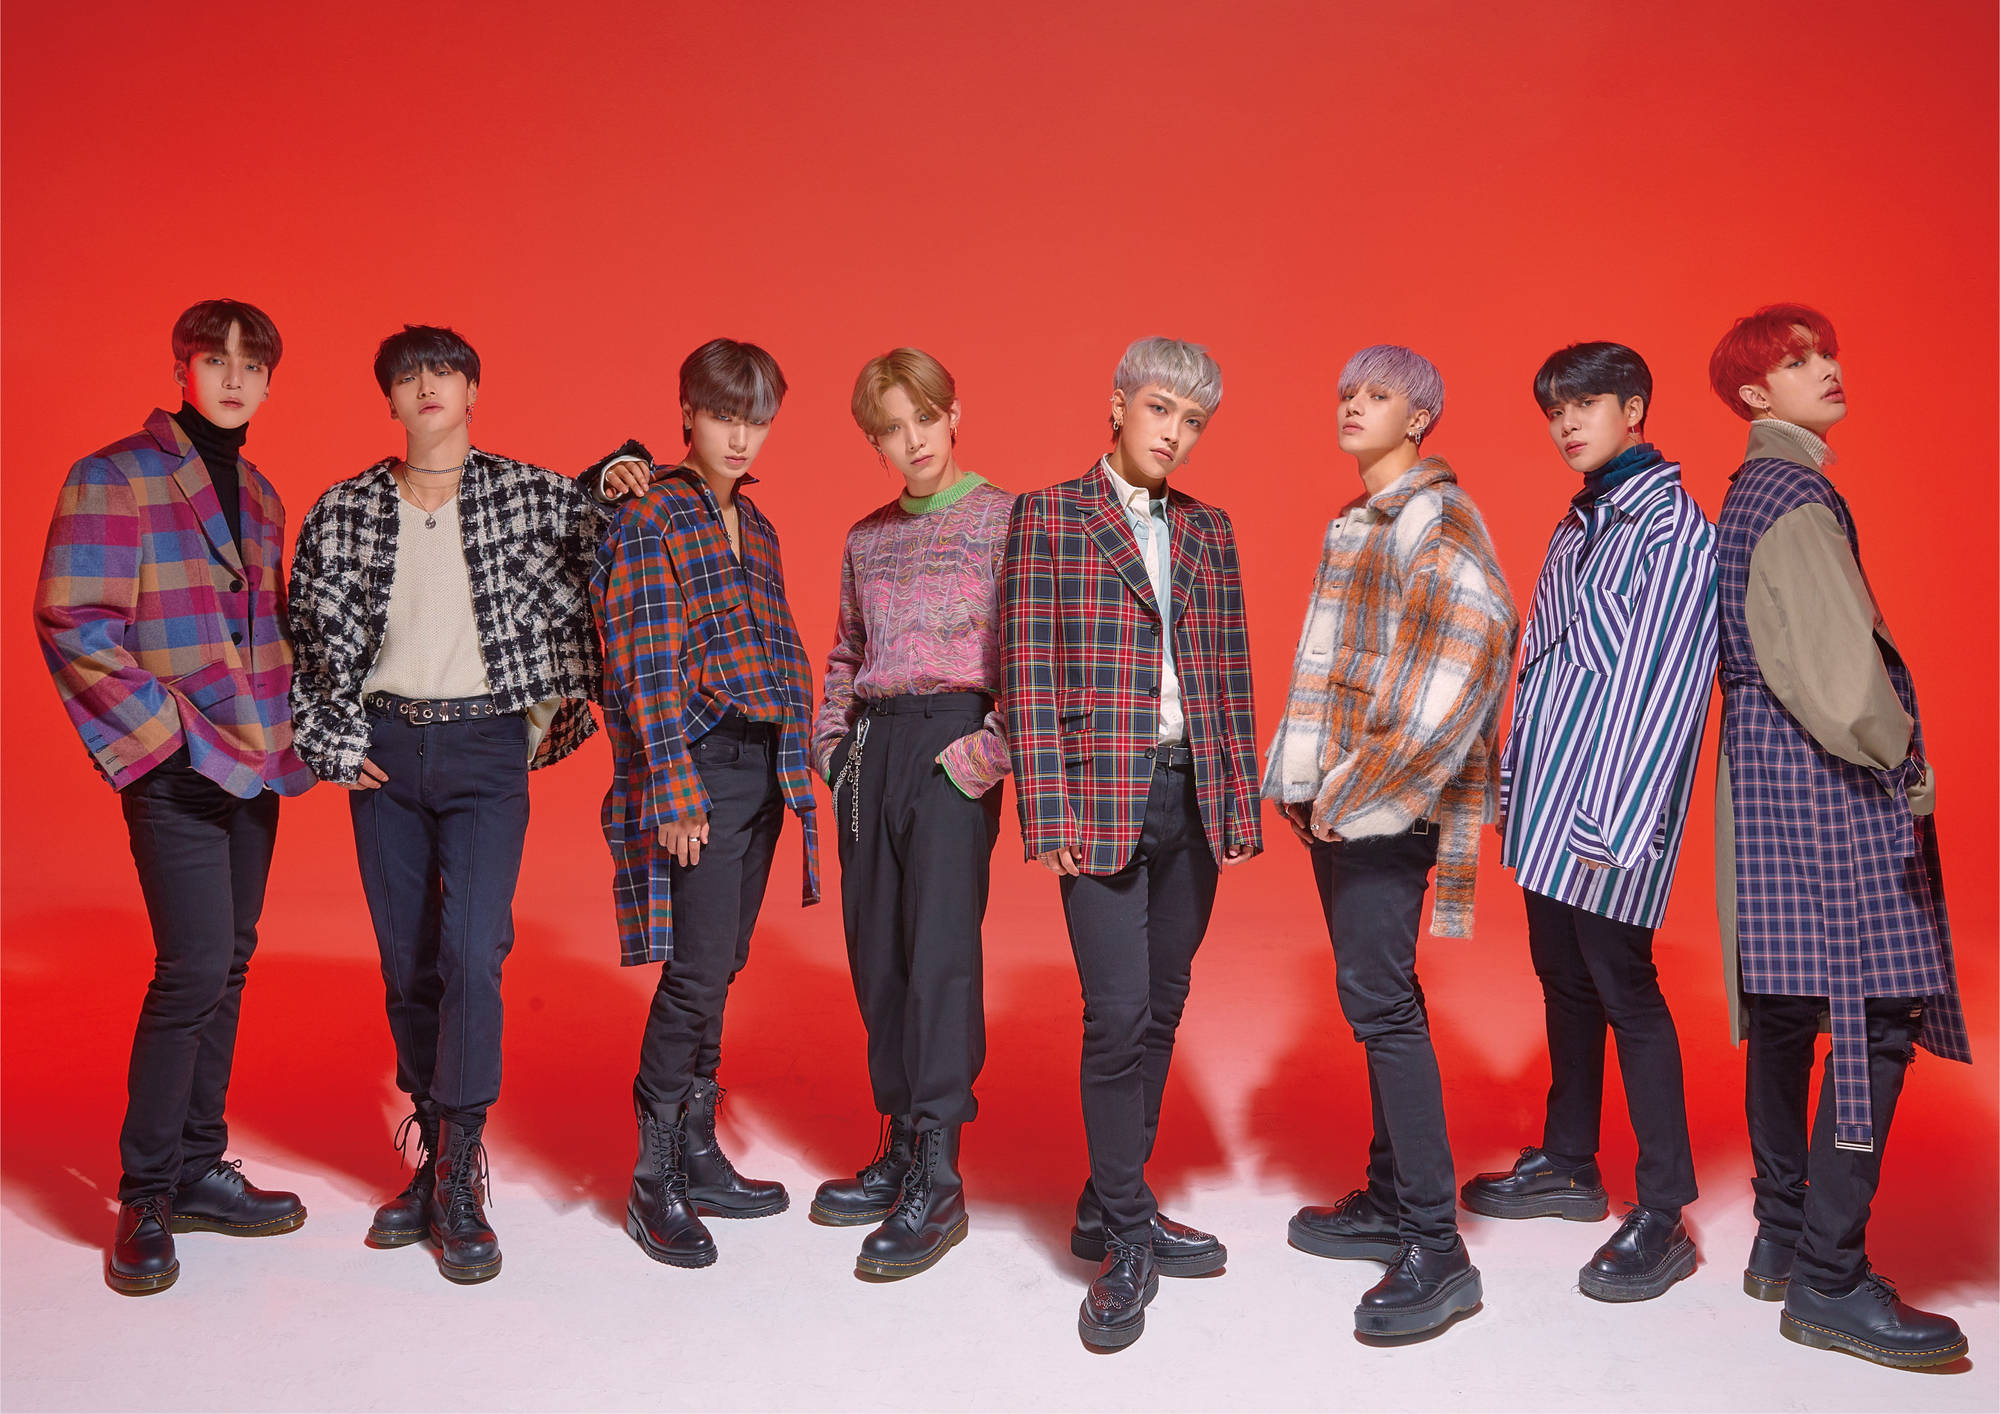 Download Ateez Red Background Wallpaper 